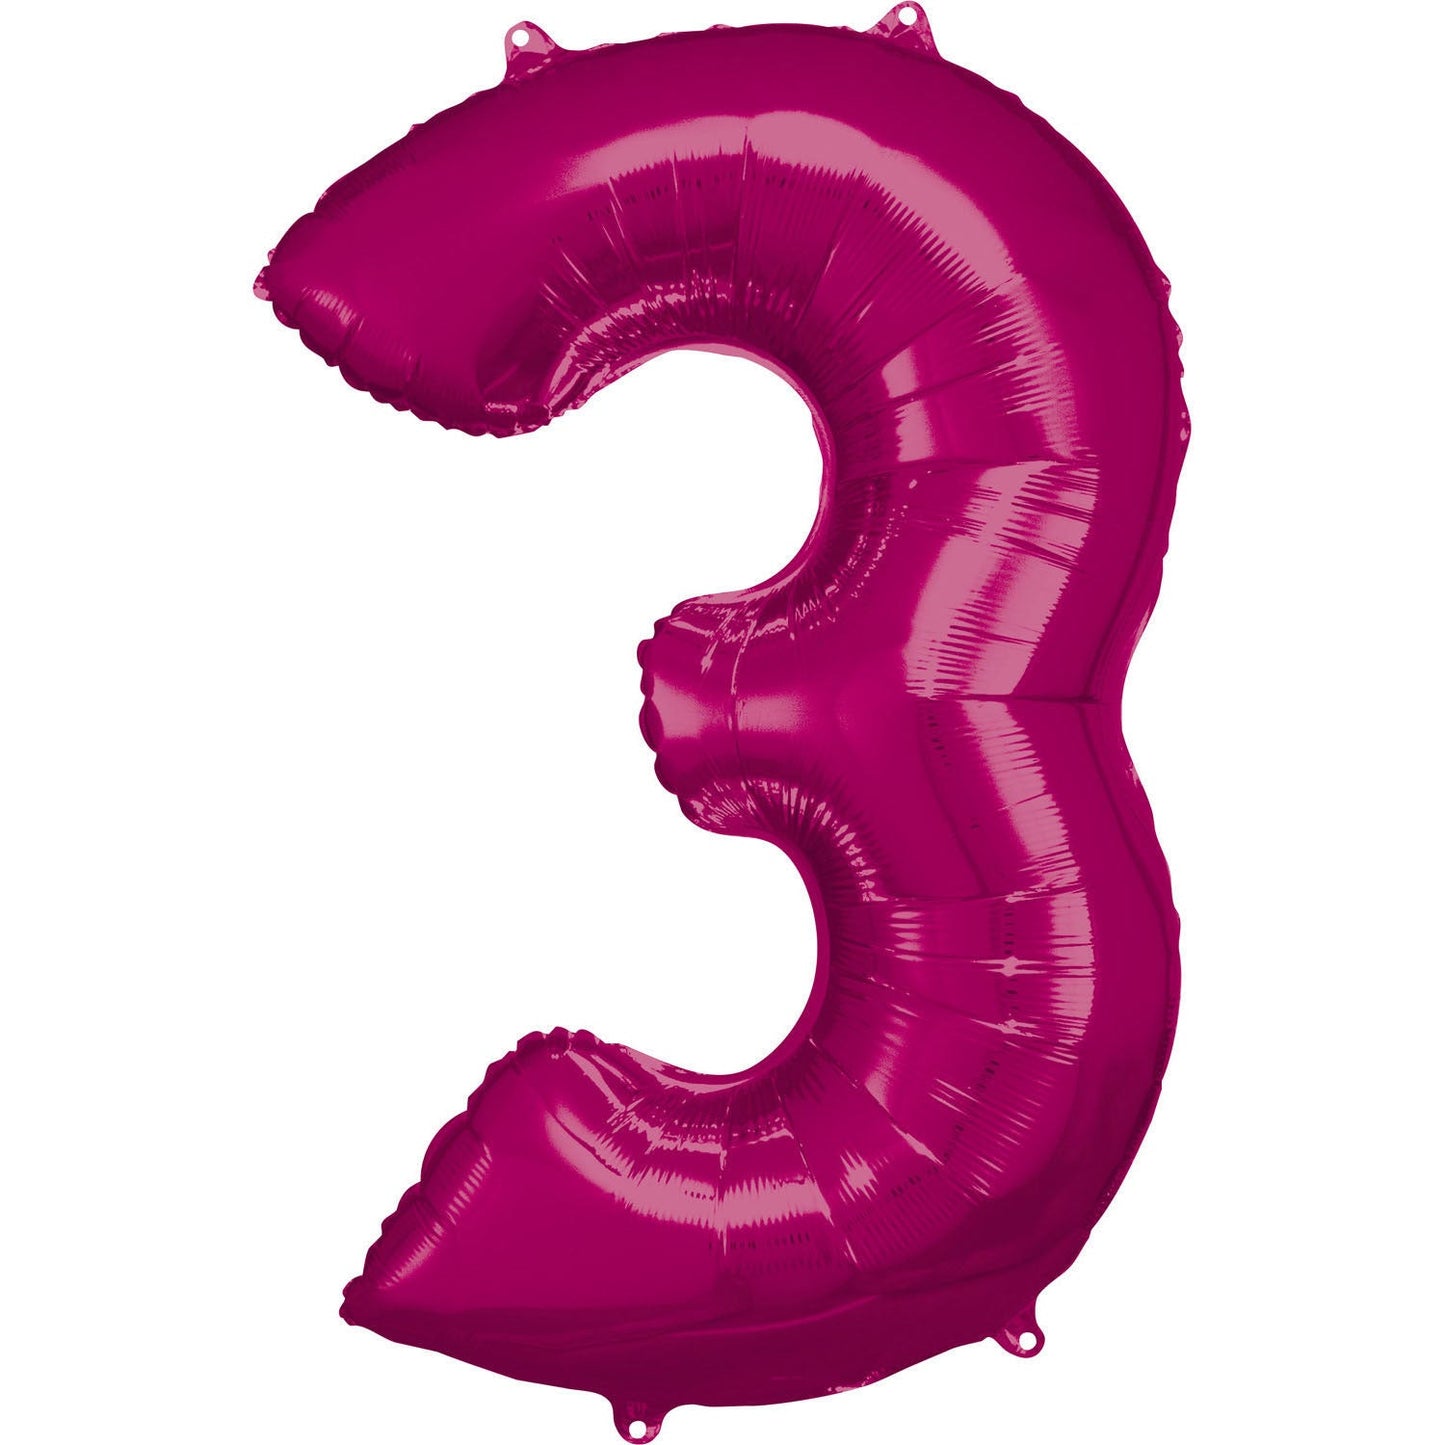 Pink Supershape Number 3 Foil Balloon 88cm (34in) height by 53cm (20in) width Balloon is sold uninflated. Can be inflated with air or helium.